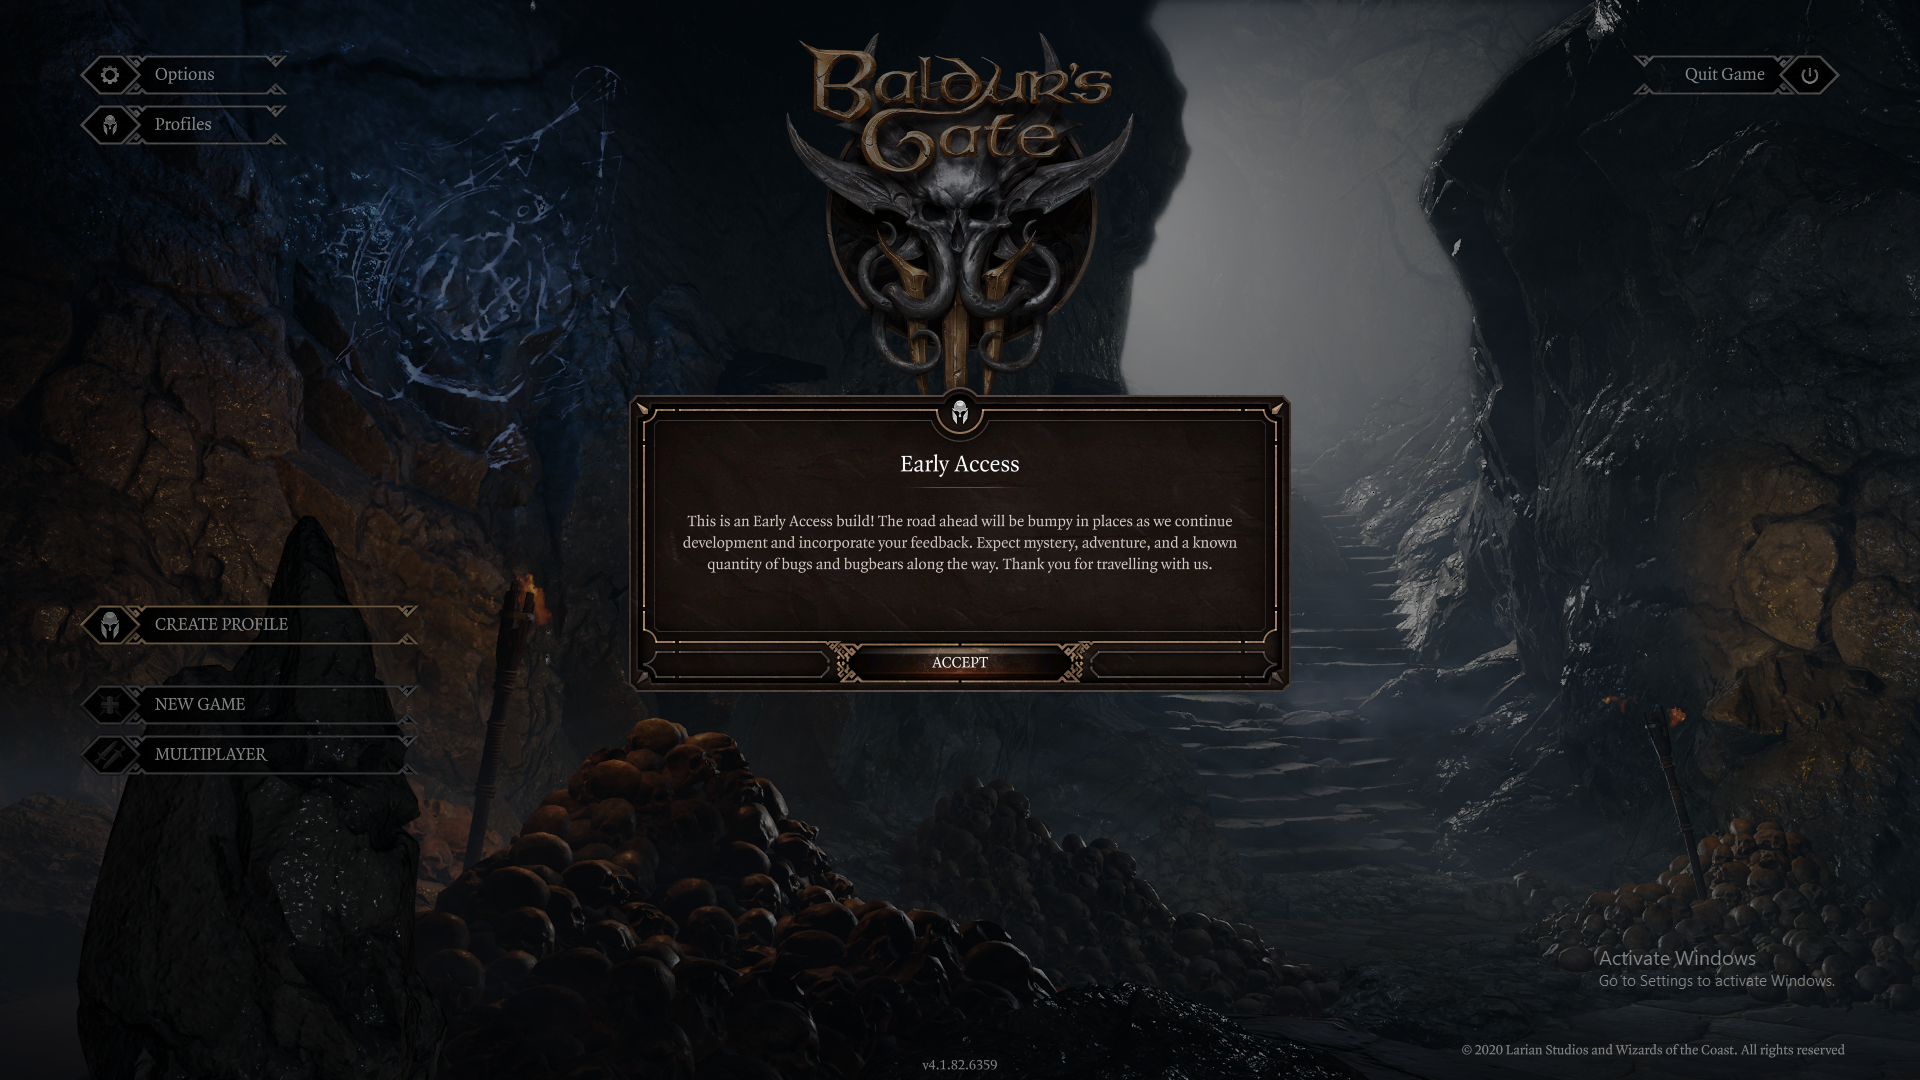 How long does it take to beat Baldur's Gate 3? Gameplay hours for